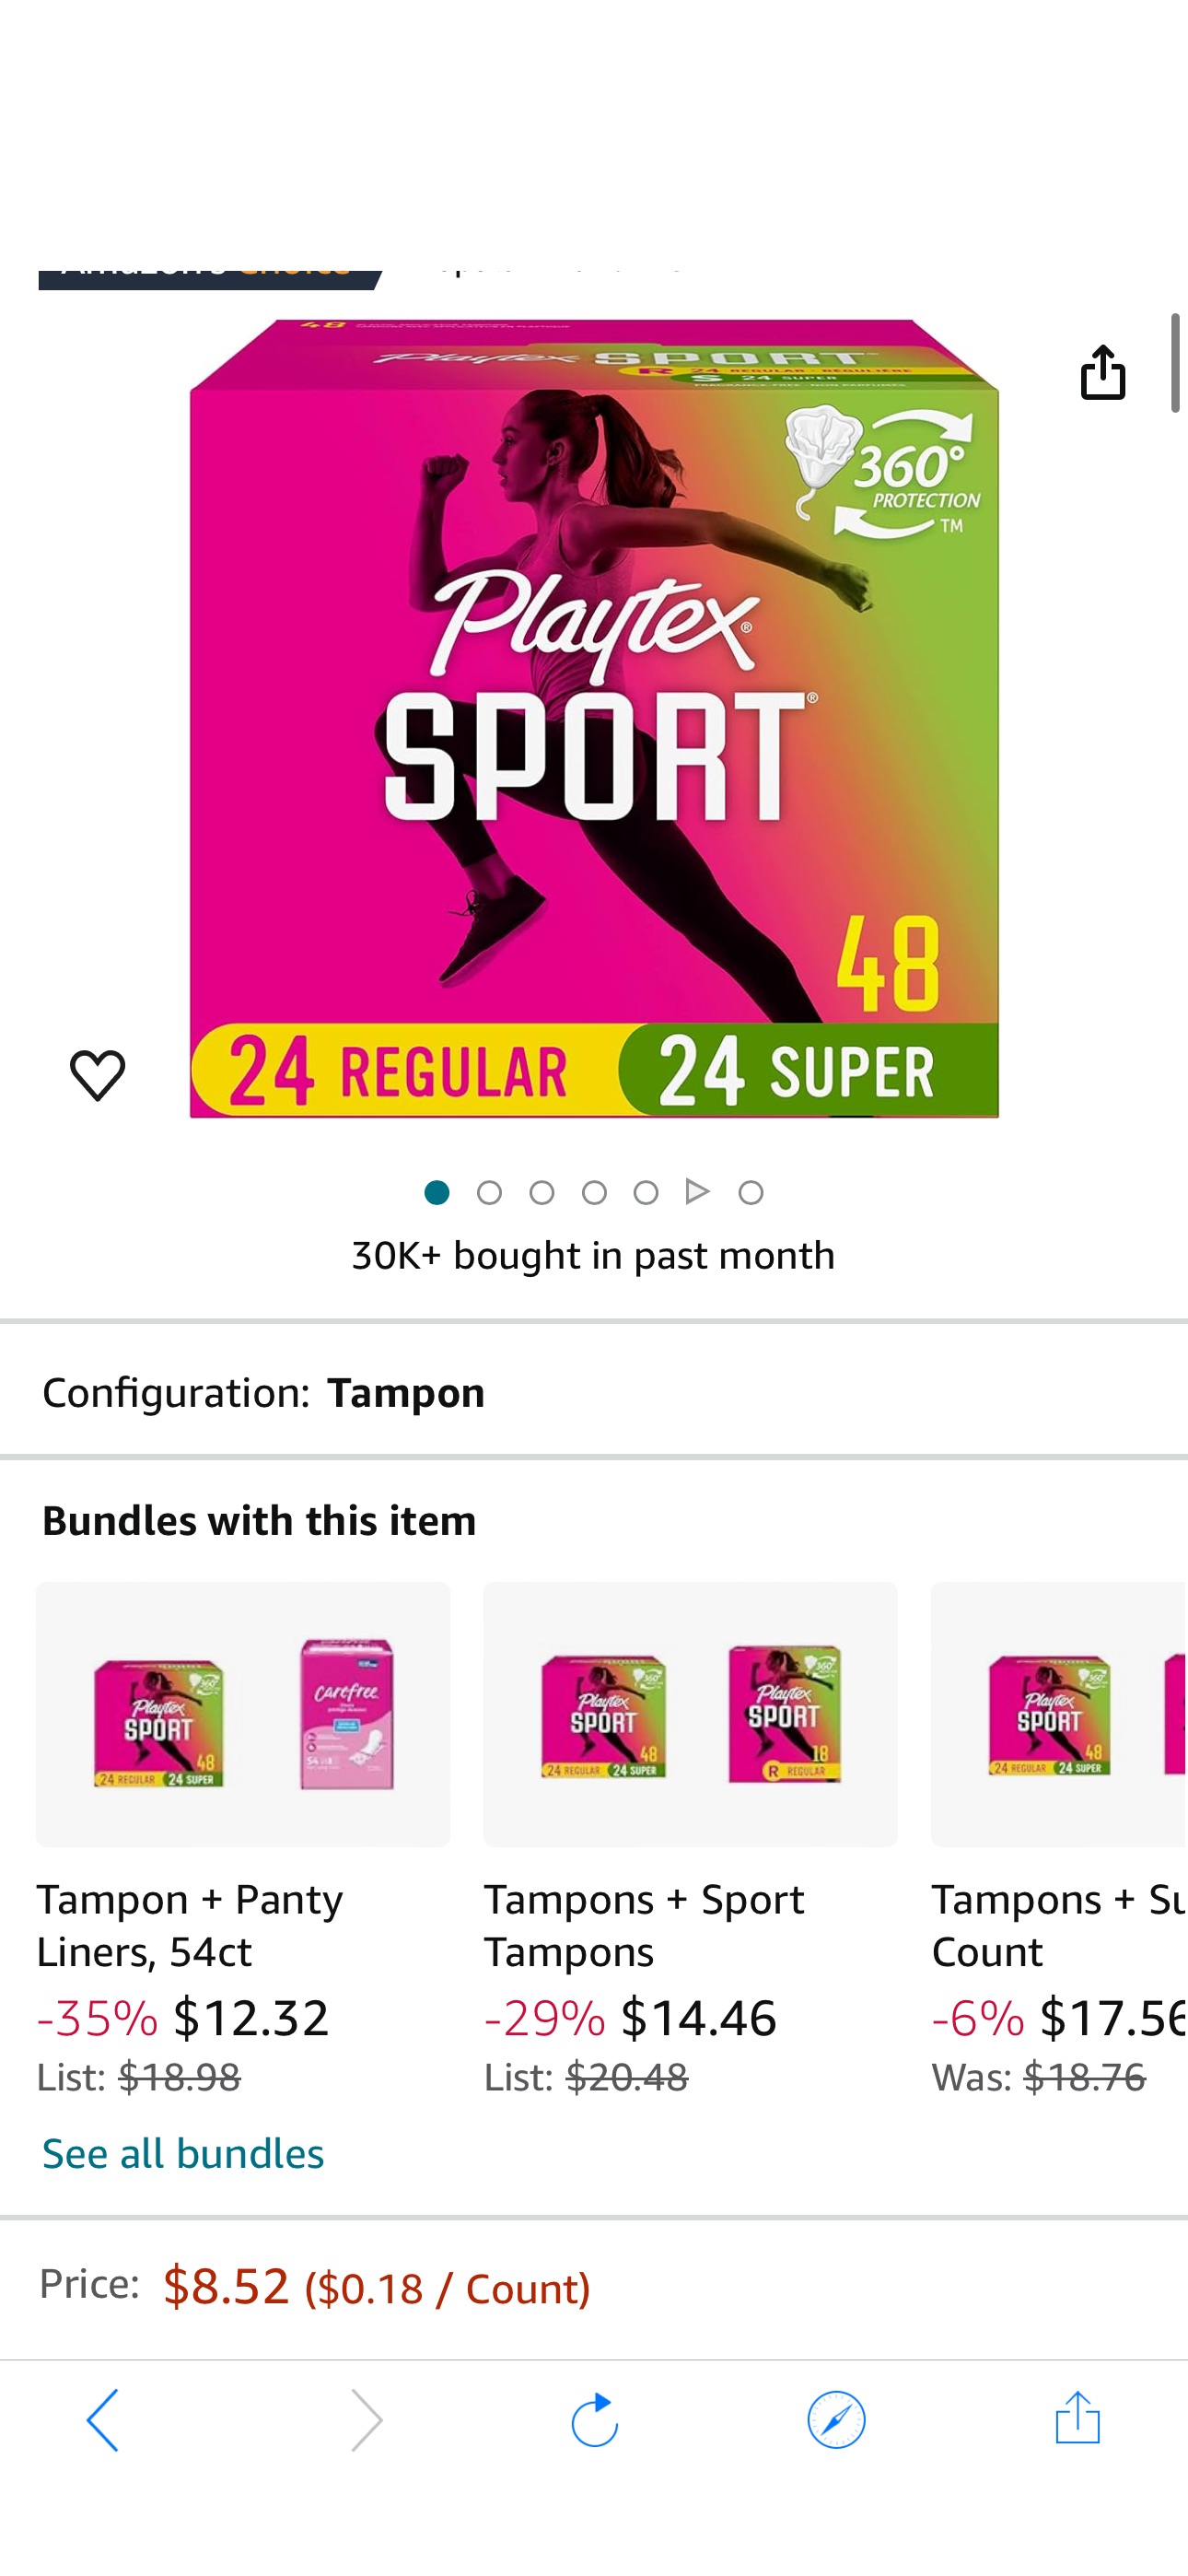 Amazon.com: Playtex Sport Tampons, Multipack (24ct Regular/24ct Super Absorbency), Fragrance-Free - 48ct : Health & Household